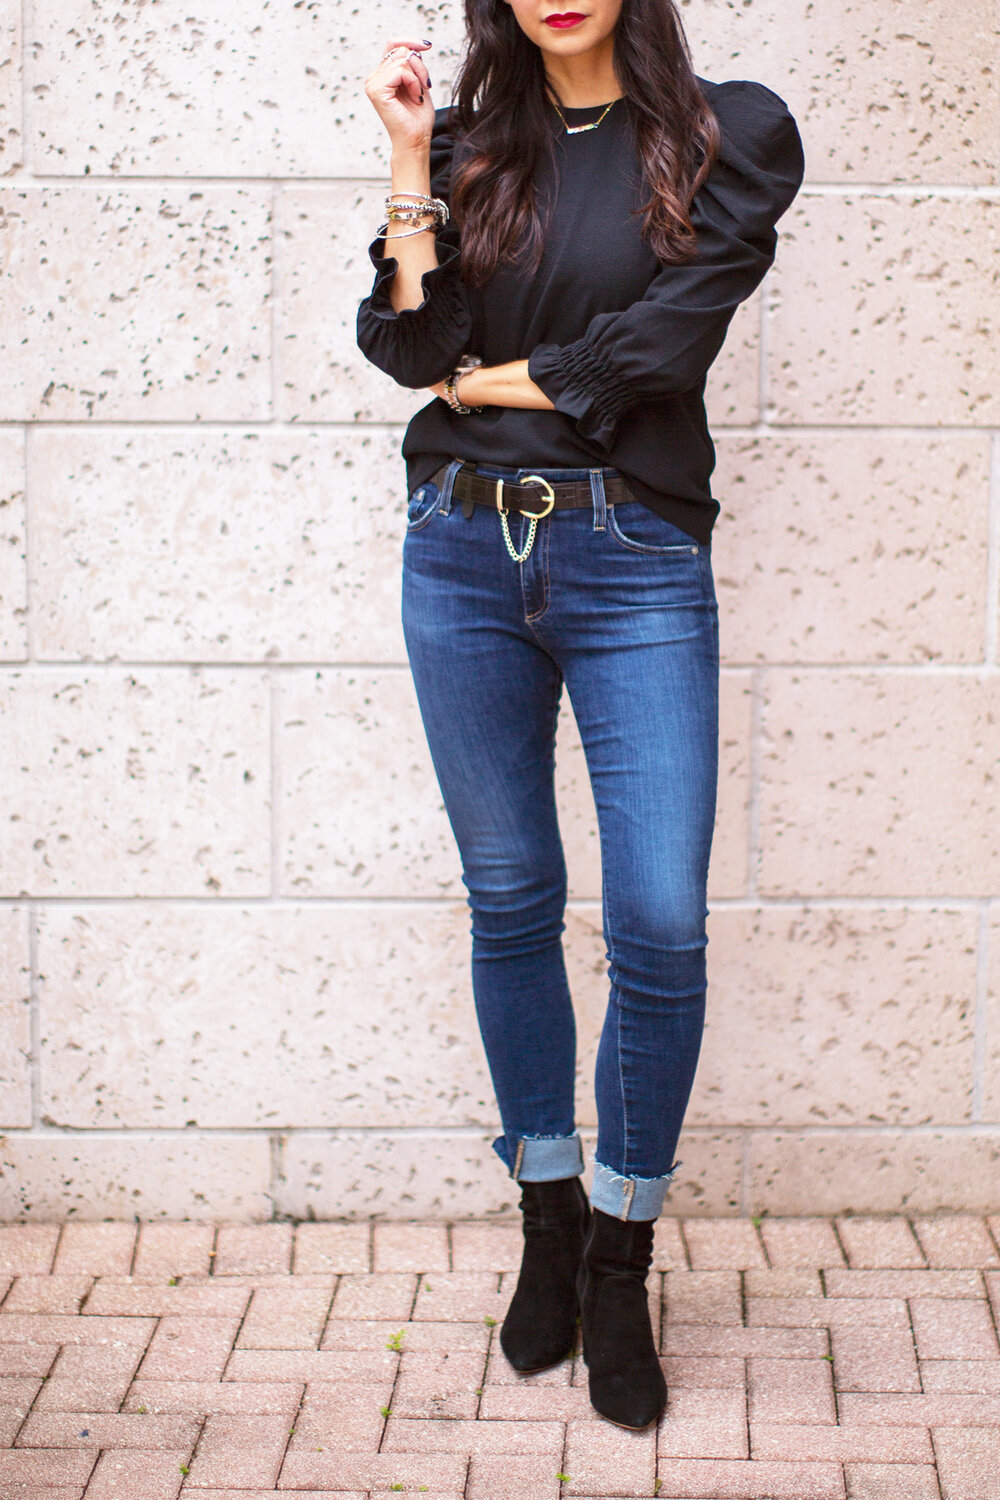 Cute jeans look with chain belt